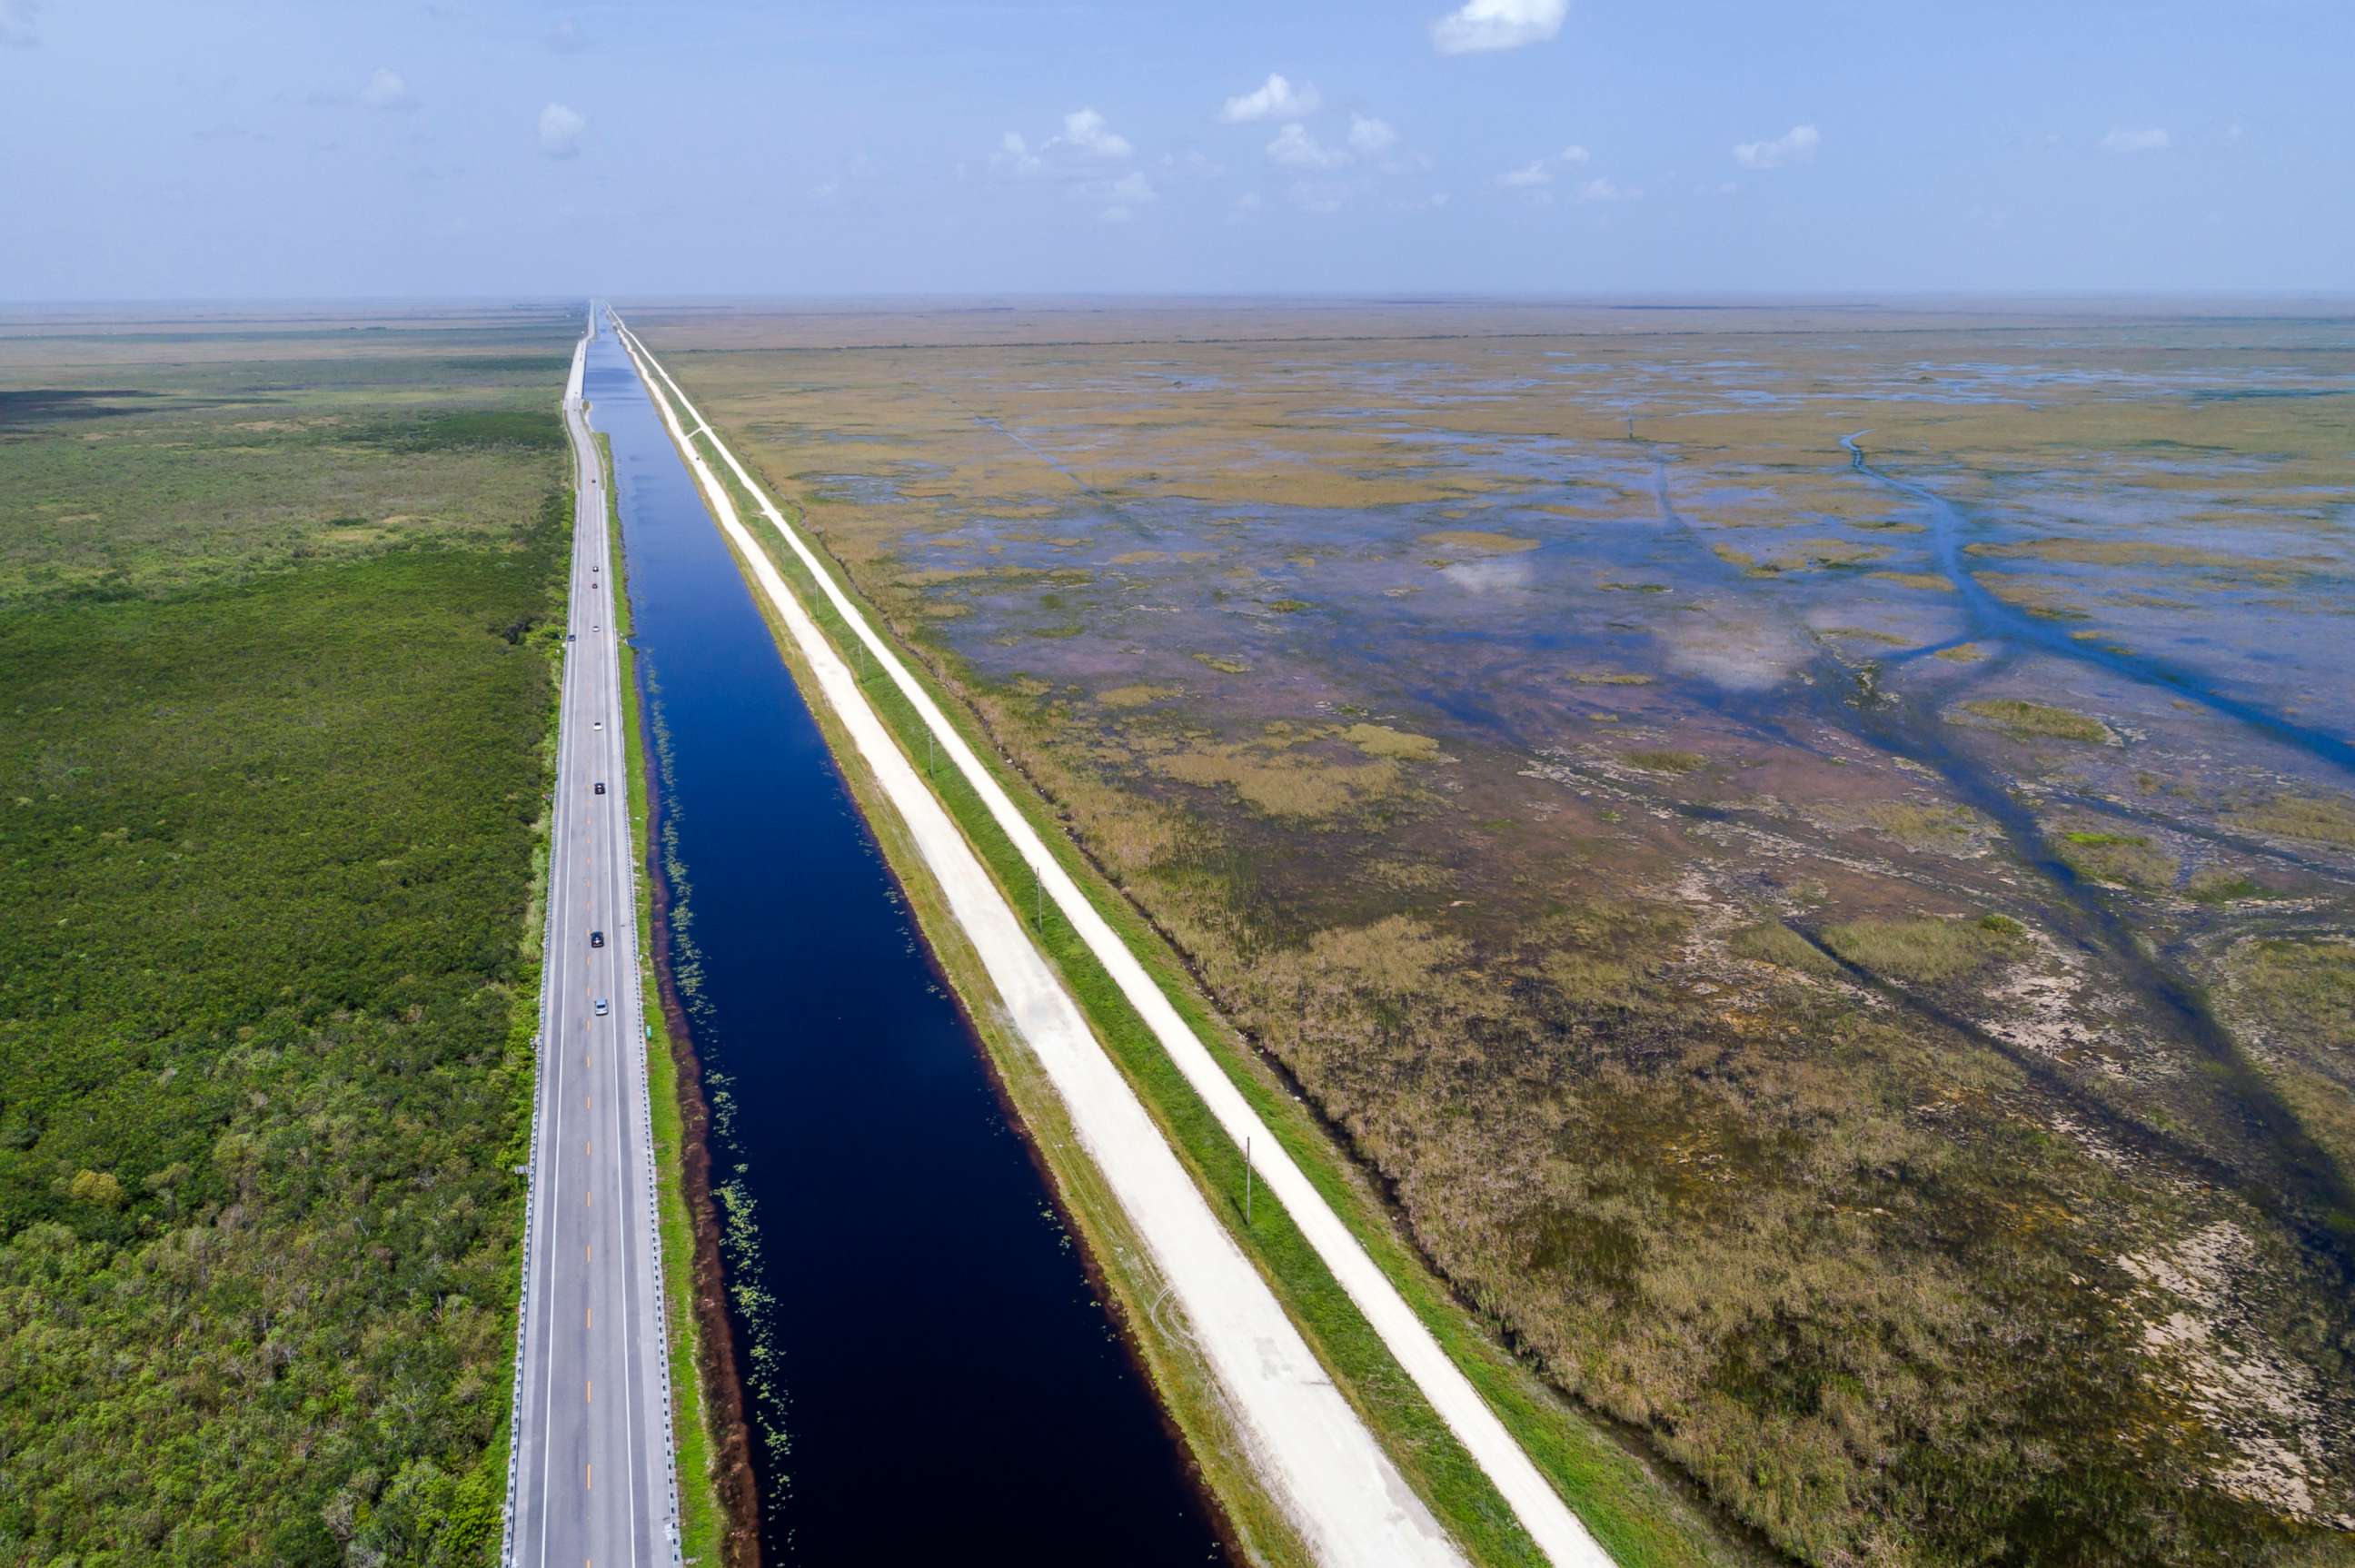 PHOTO: An undated photo shows the Everglades National Park, Tamiami Trail and canal in Fla.